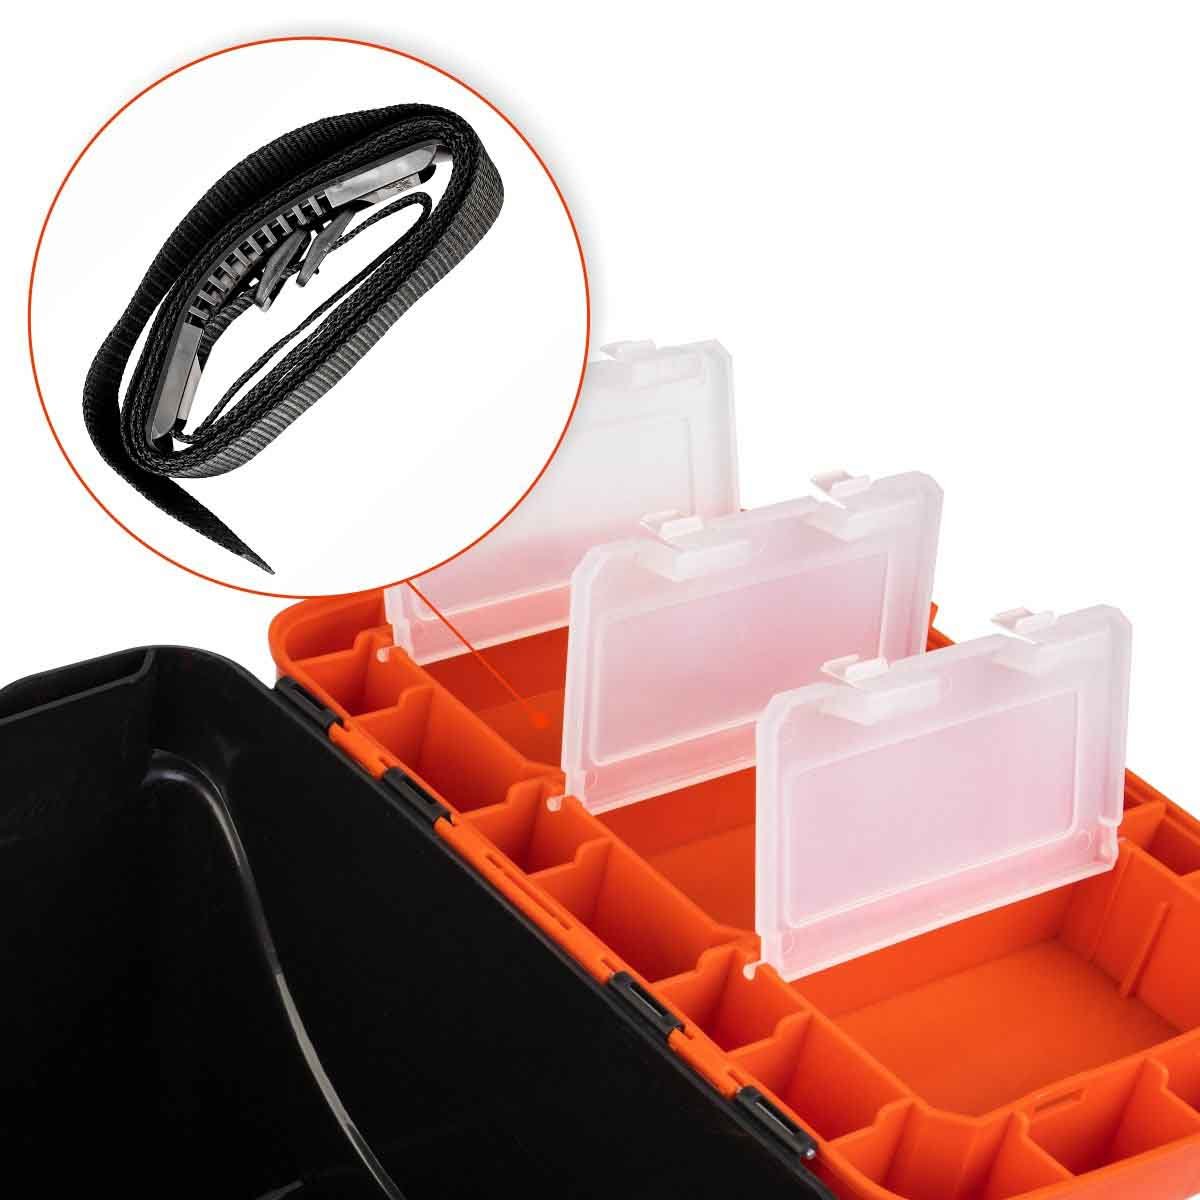 FishBox 10 liter Box for Ice Fishing is equipped with adjustable shoulder strap